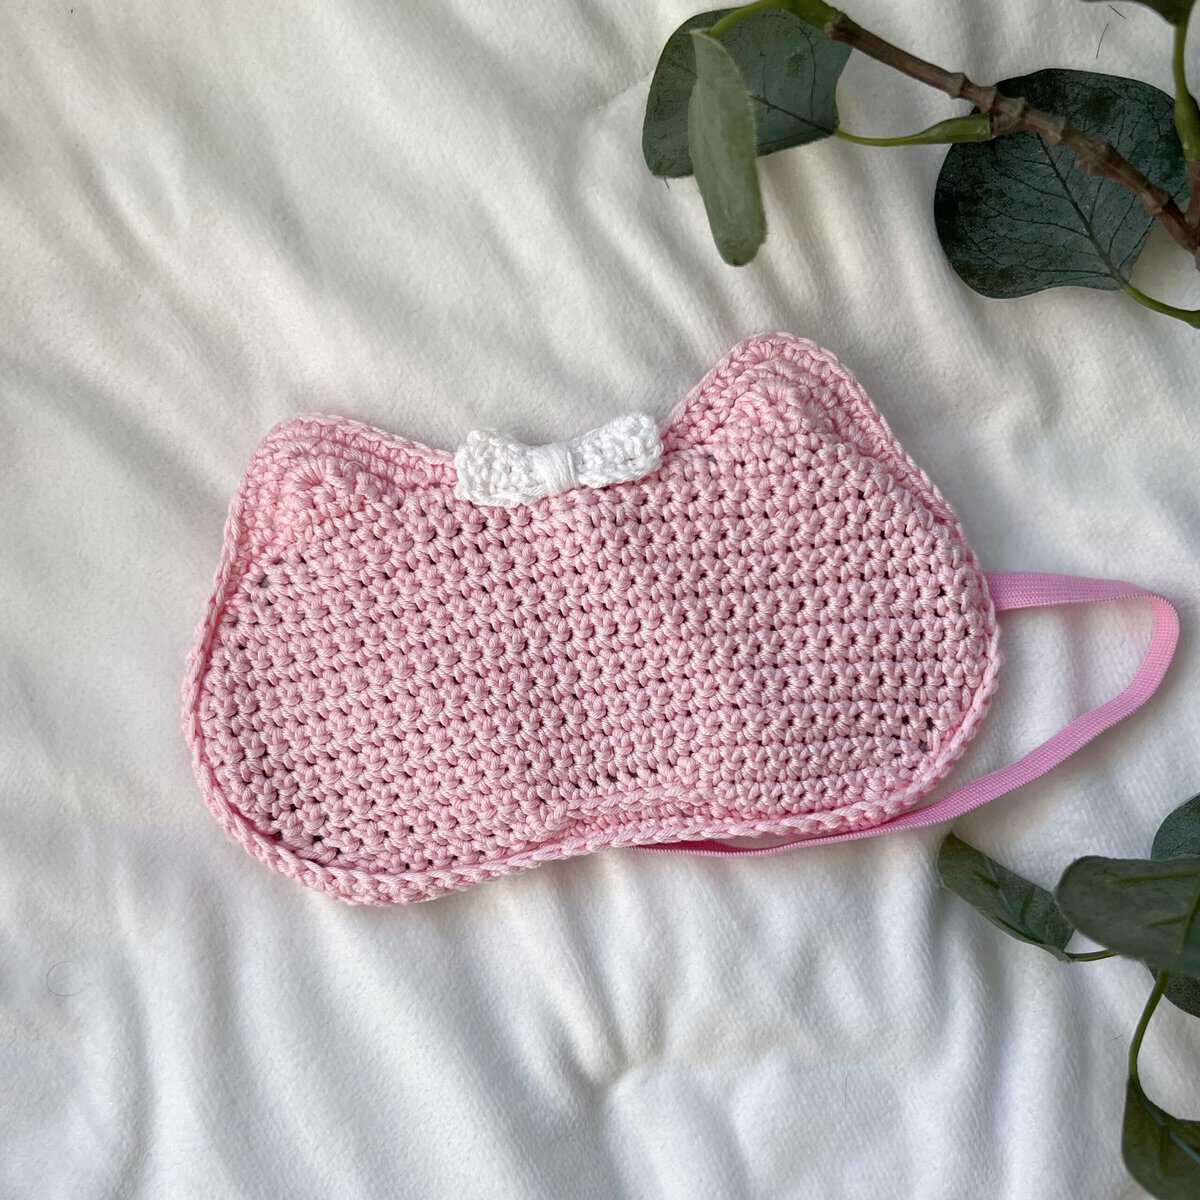 Crochet Eye Mask Pattern with Cat Ears and Bow